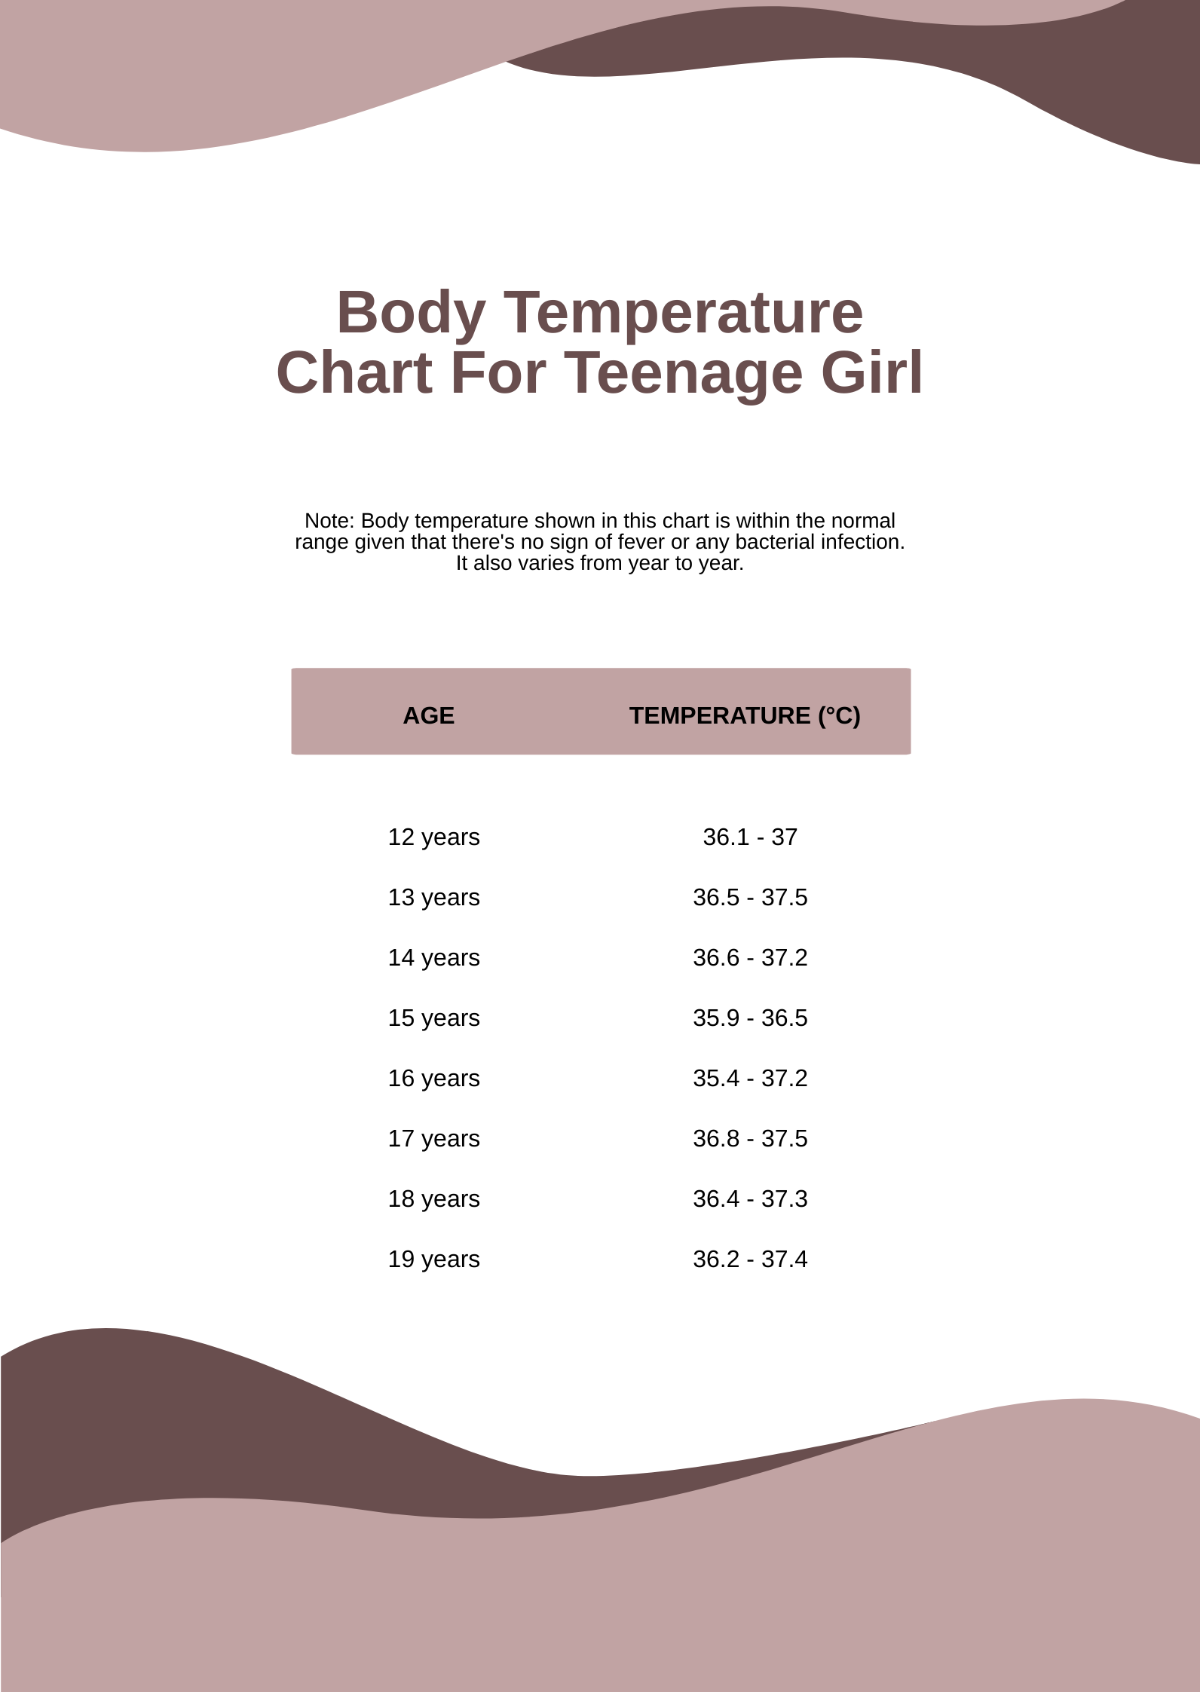 Body Temperature Chart For Teenage Girl